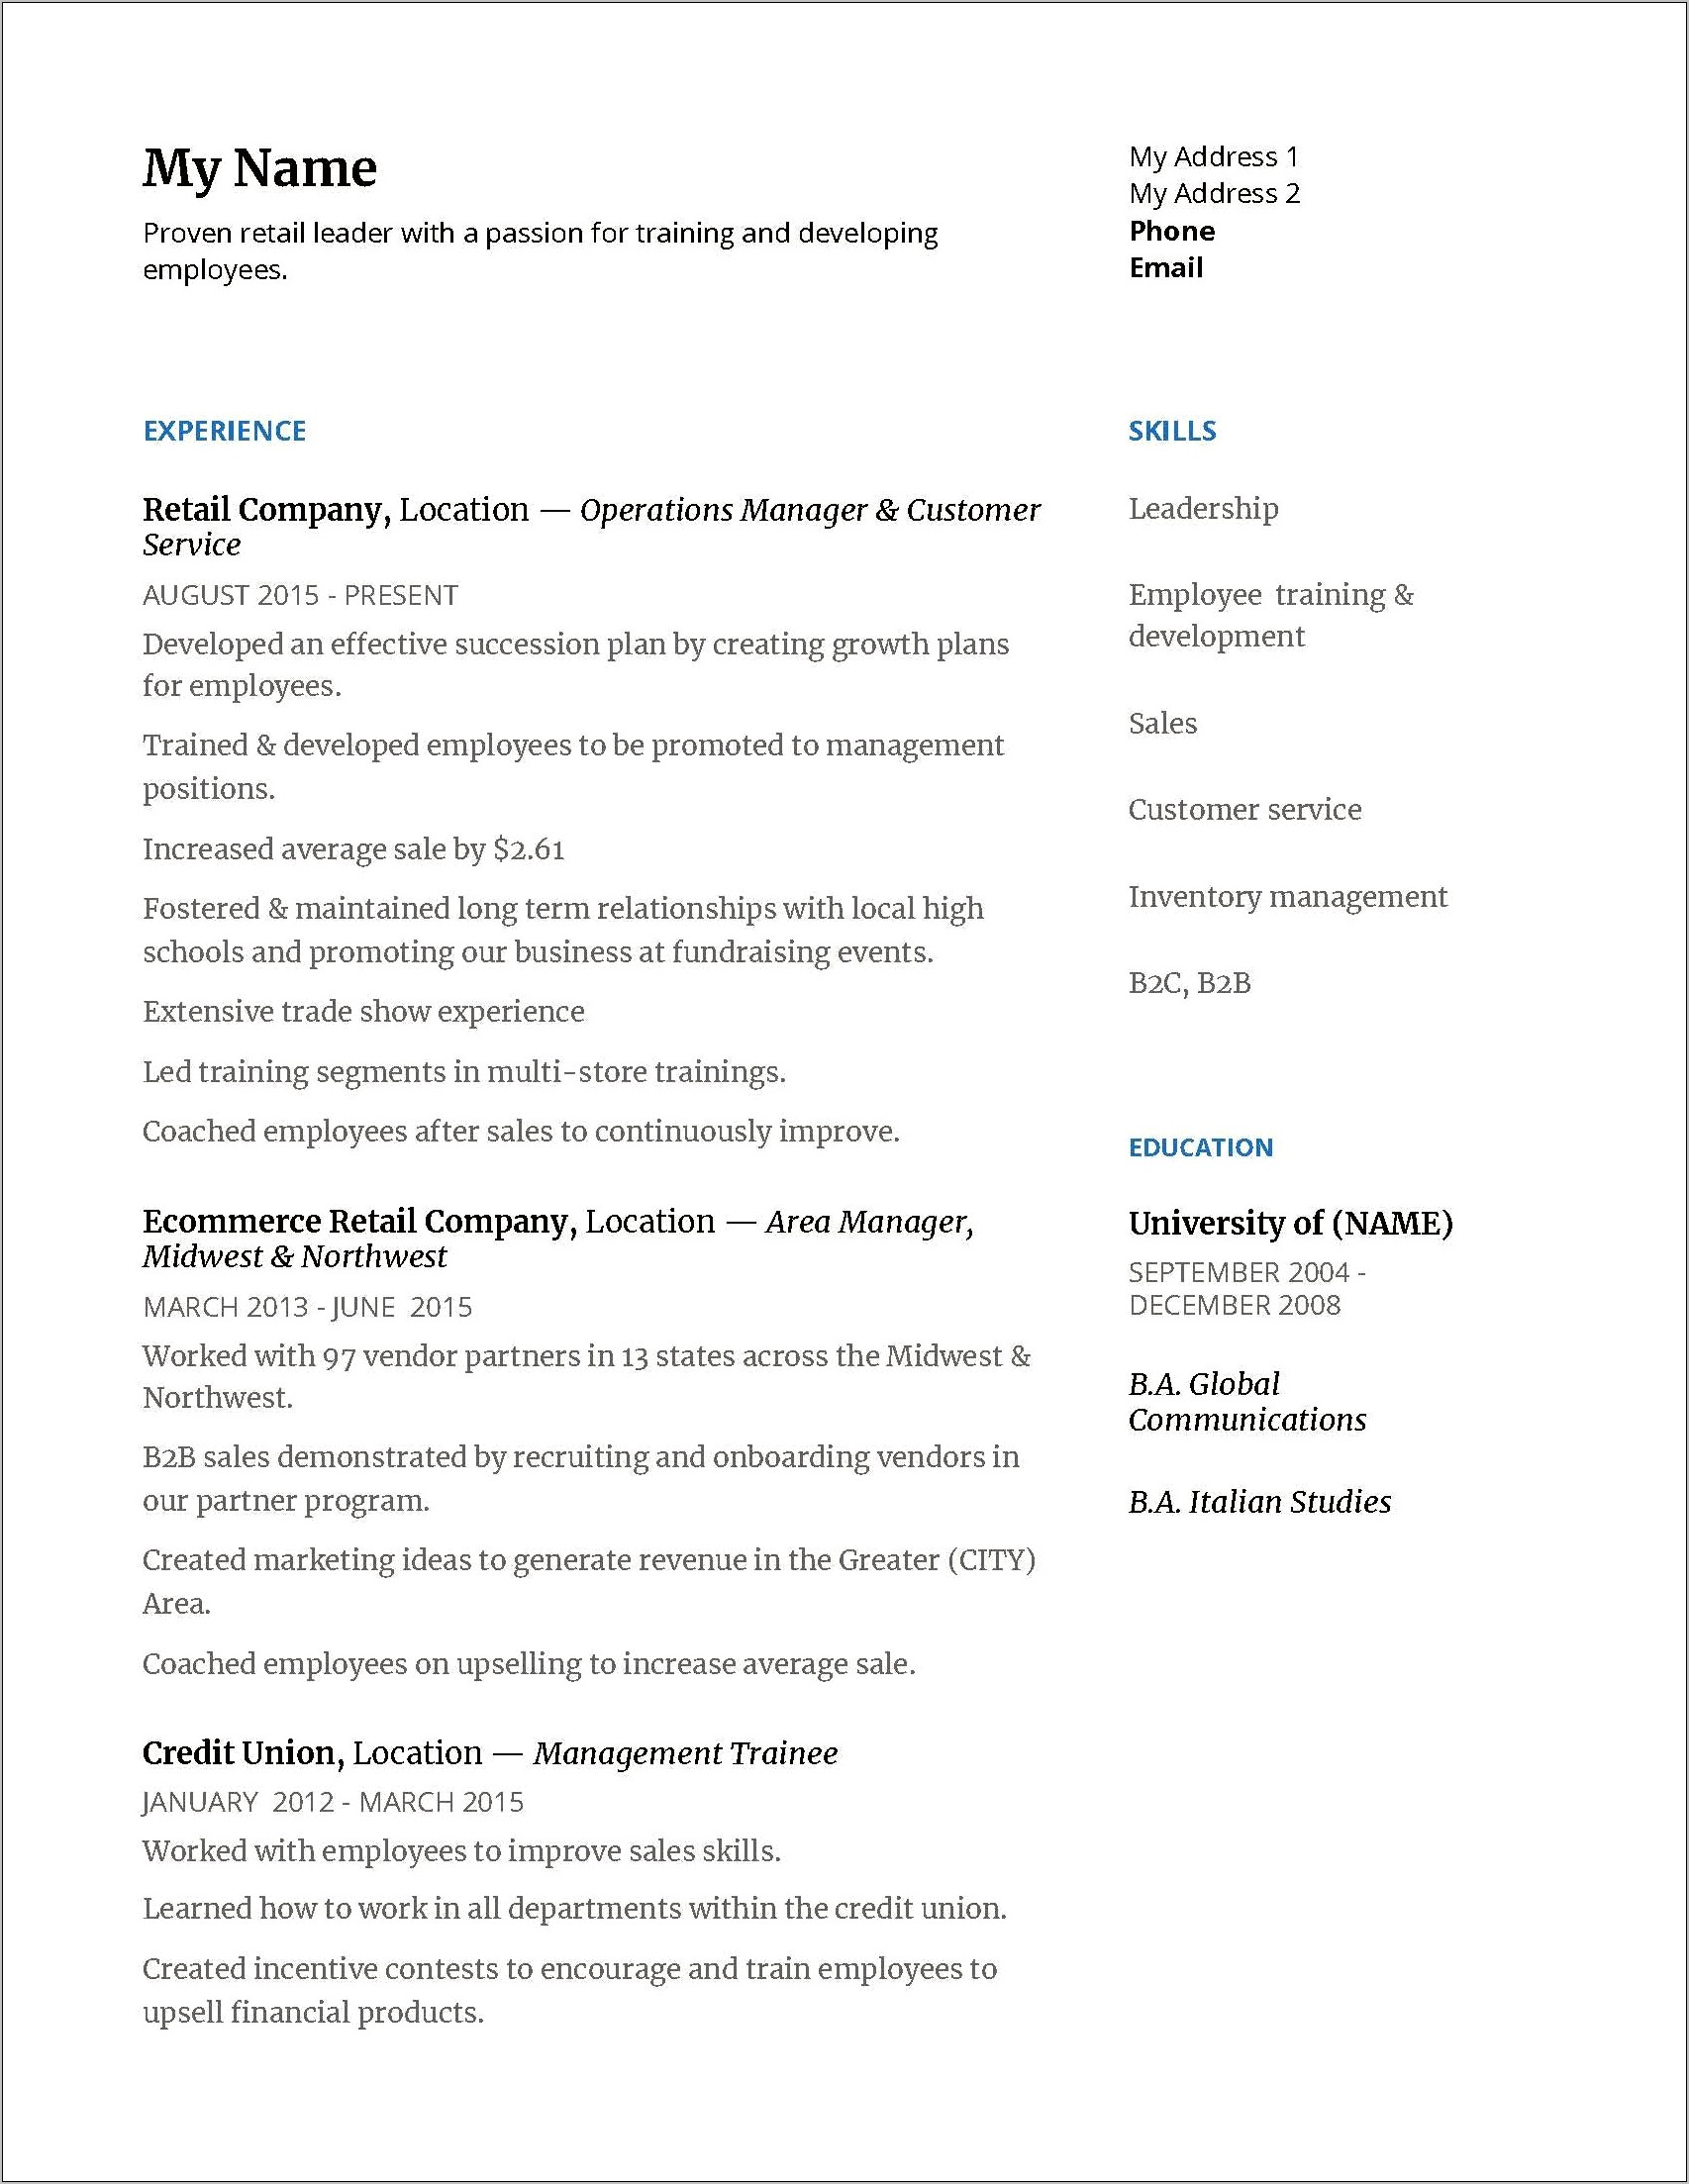 Gamestop District Manager Resume Example